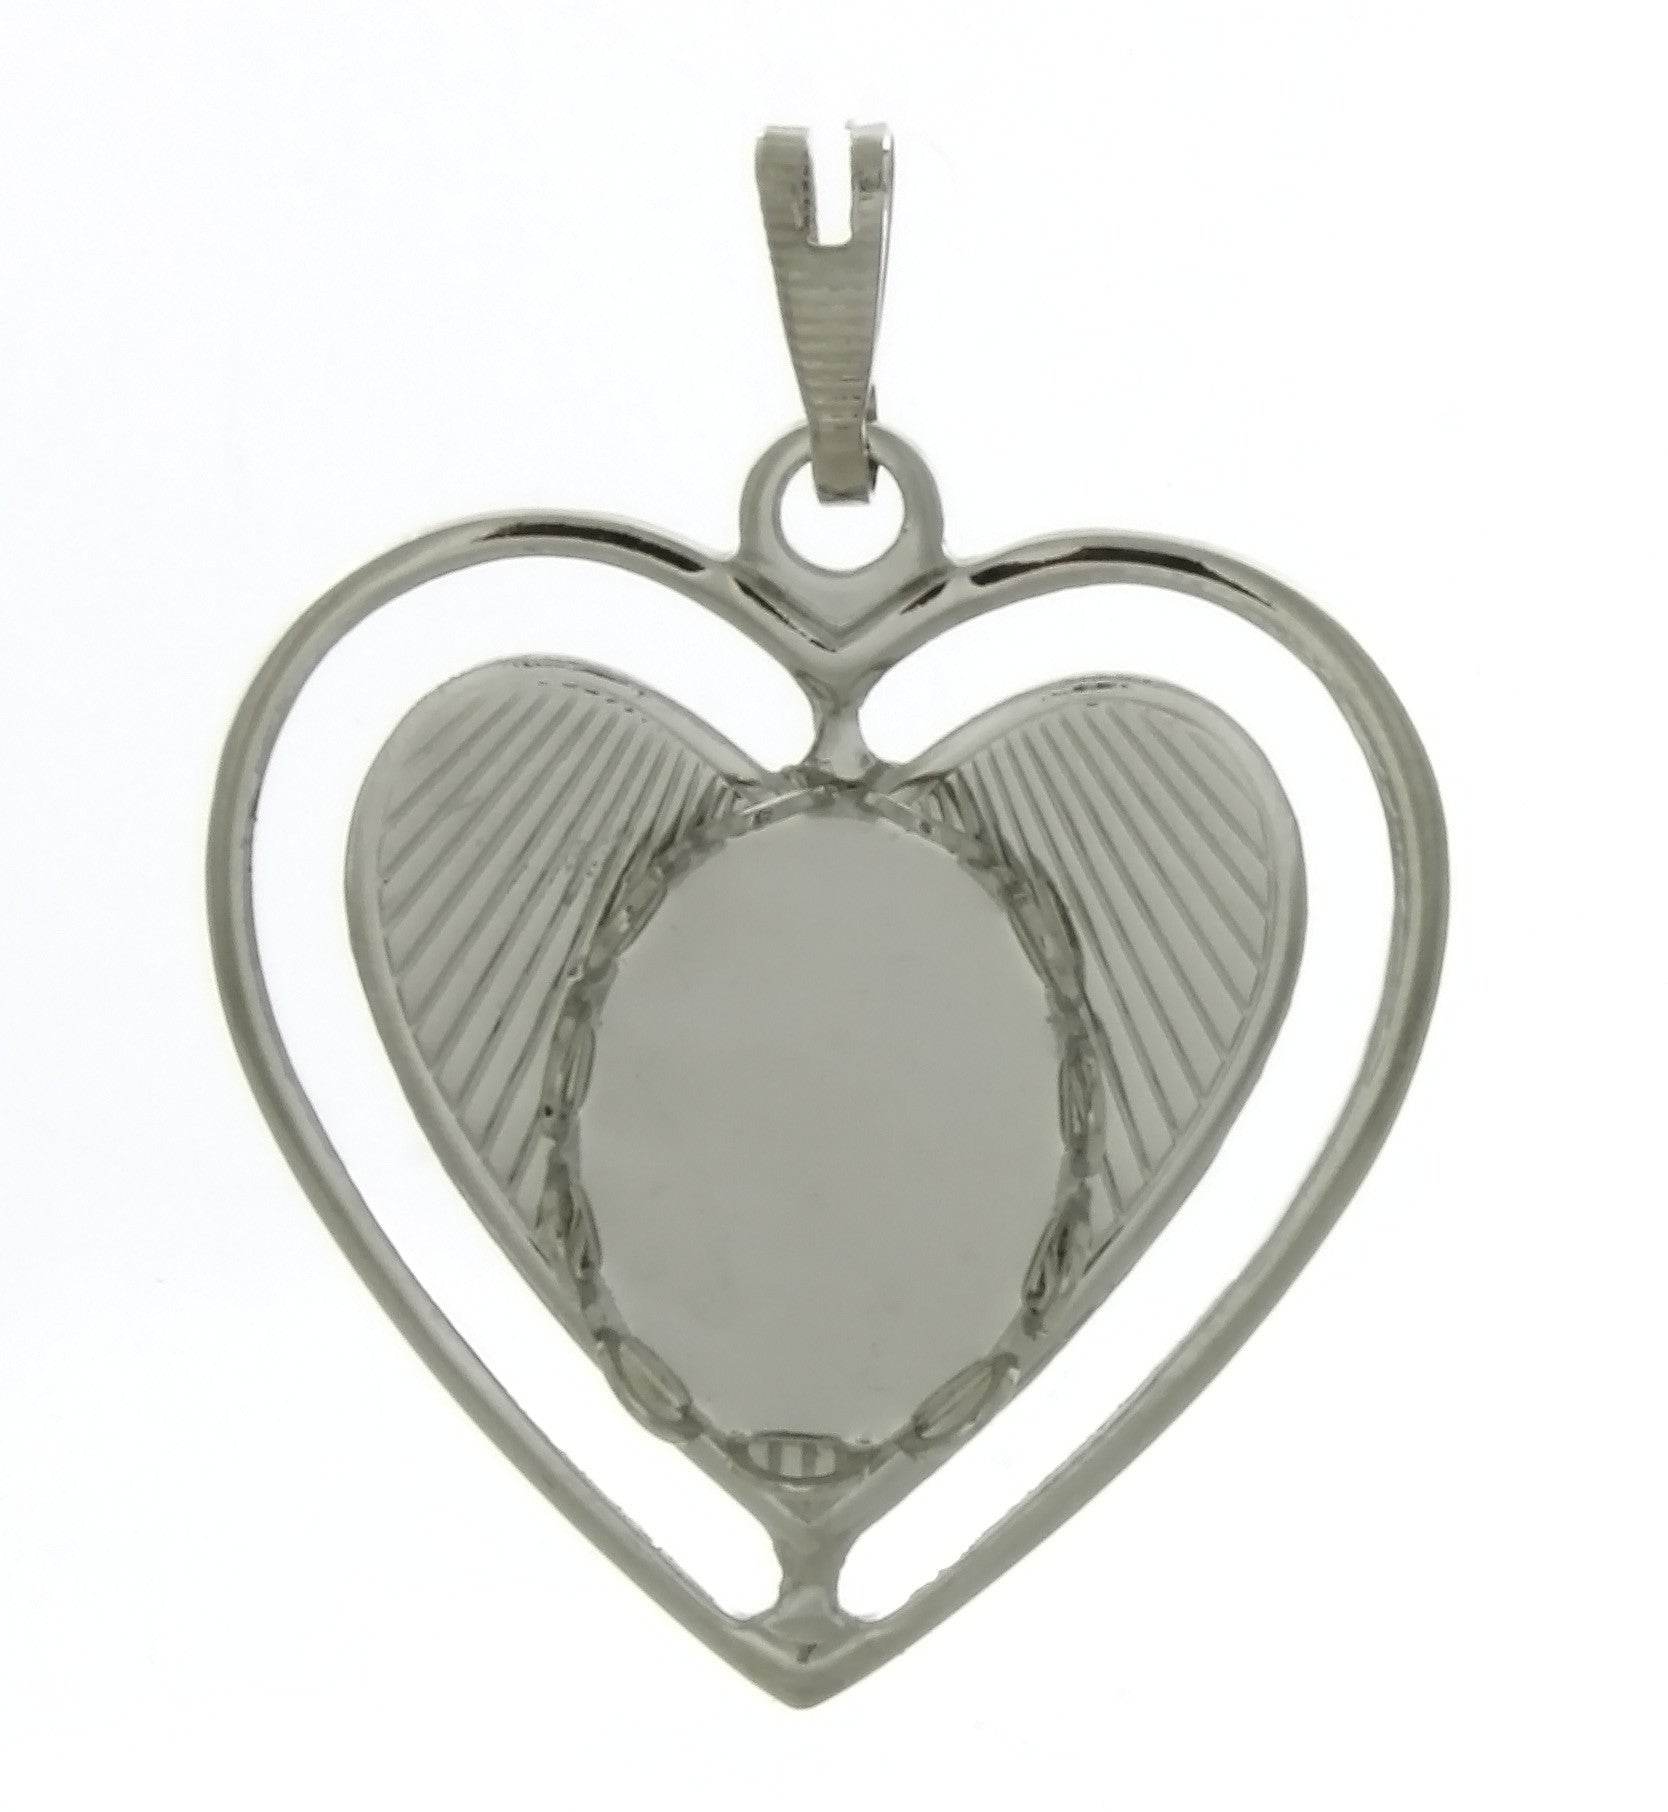 Cabochon Setting Heart Pendant Holds 10x14 mm Oval Cabochon